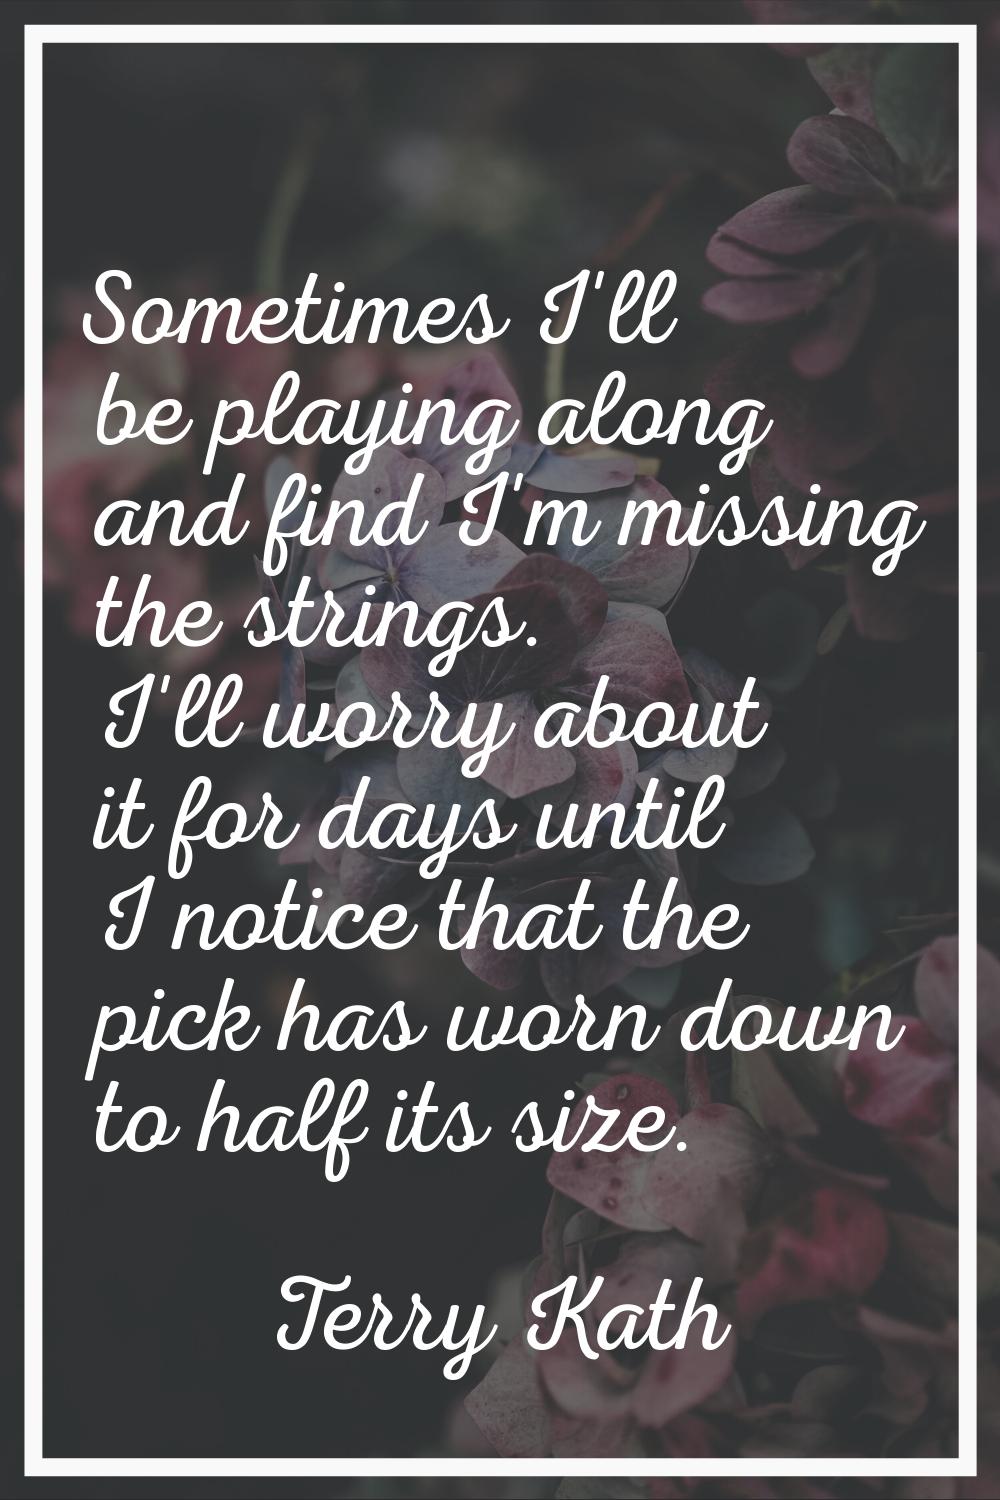 Sometimes I'll be playing along and find I'm missing the strings. I'll worry about it for days unti